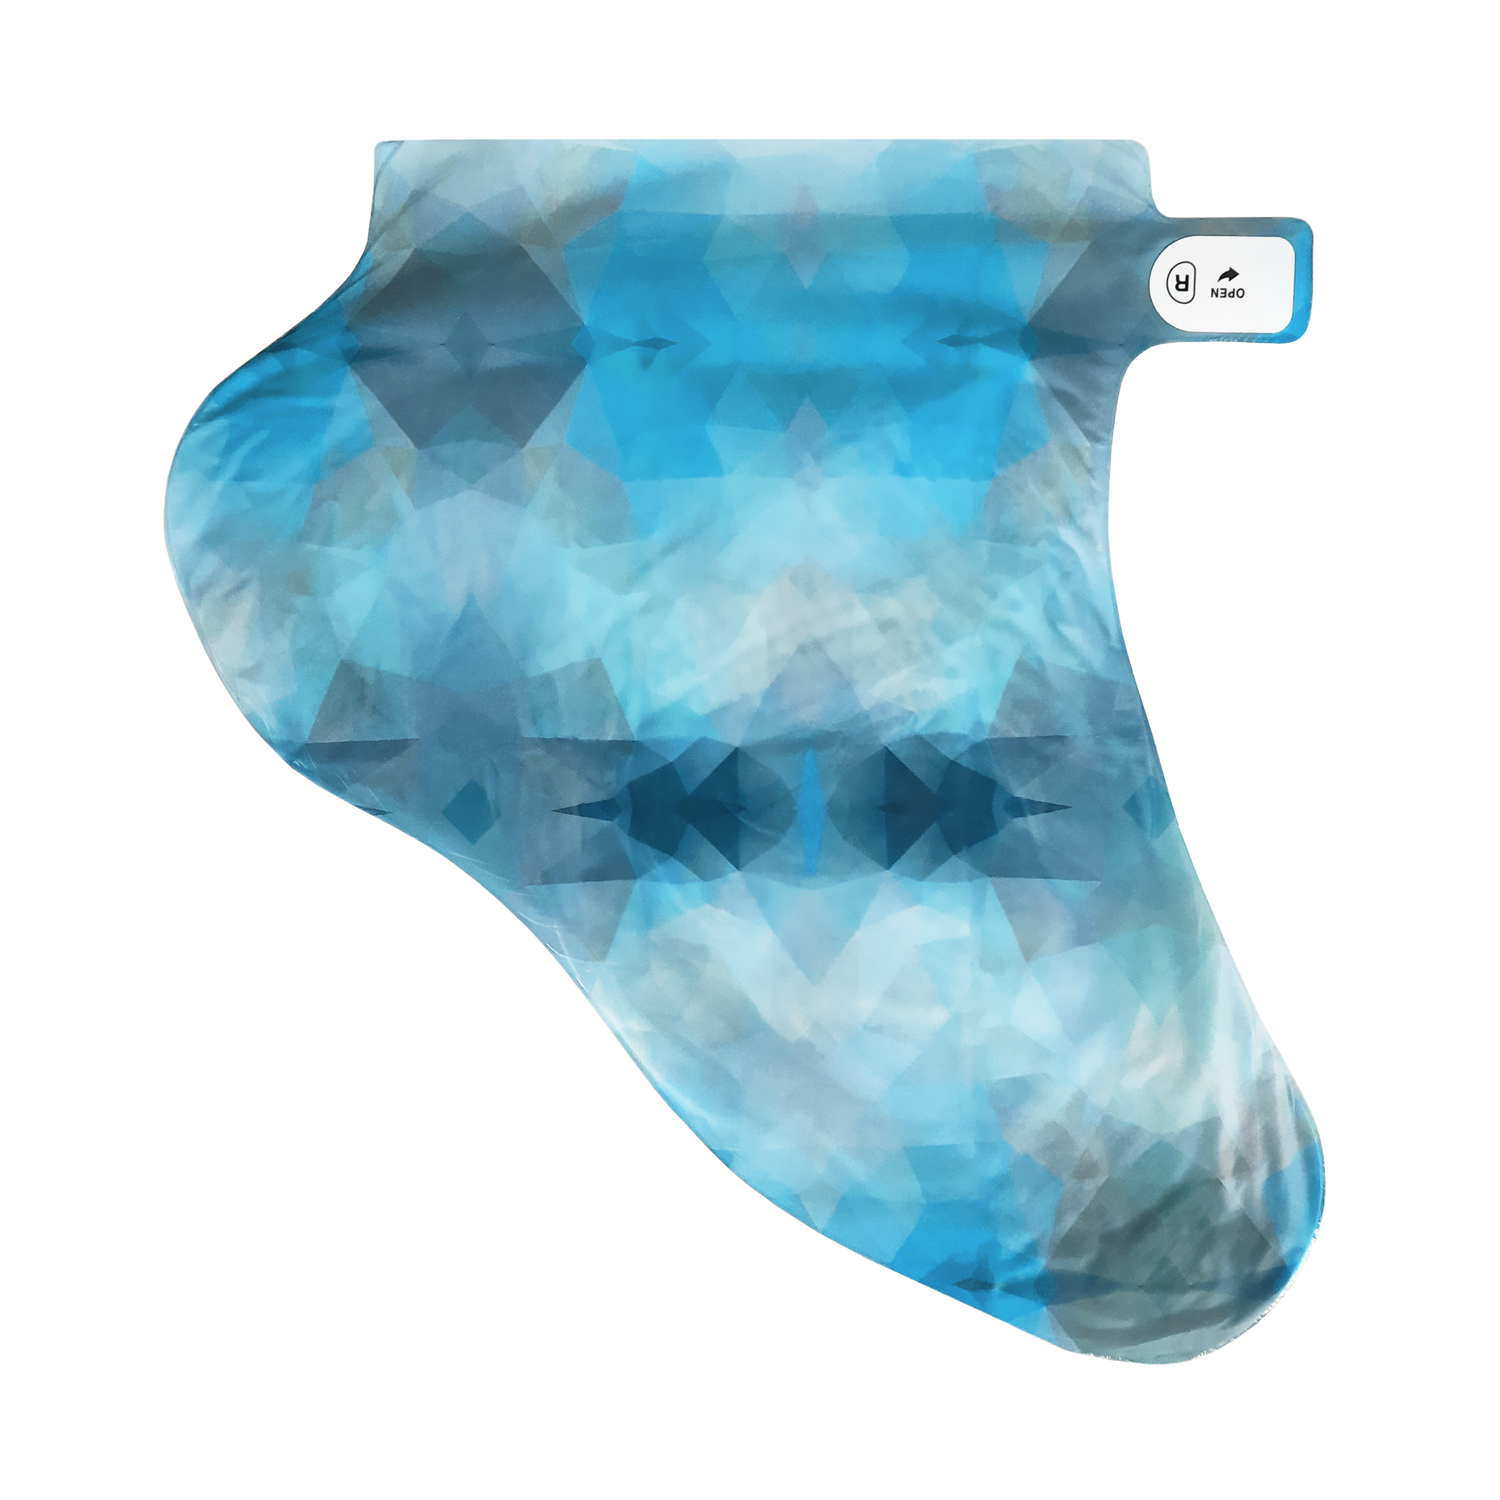 Cold Foot Mask